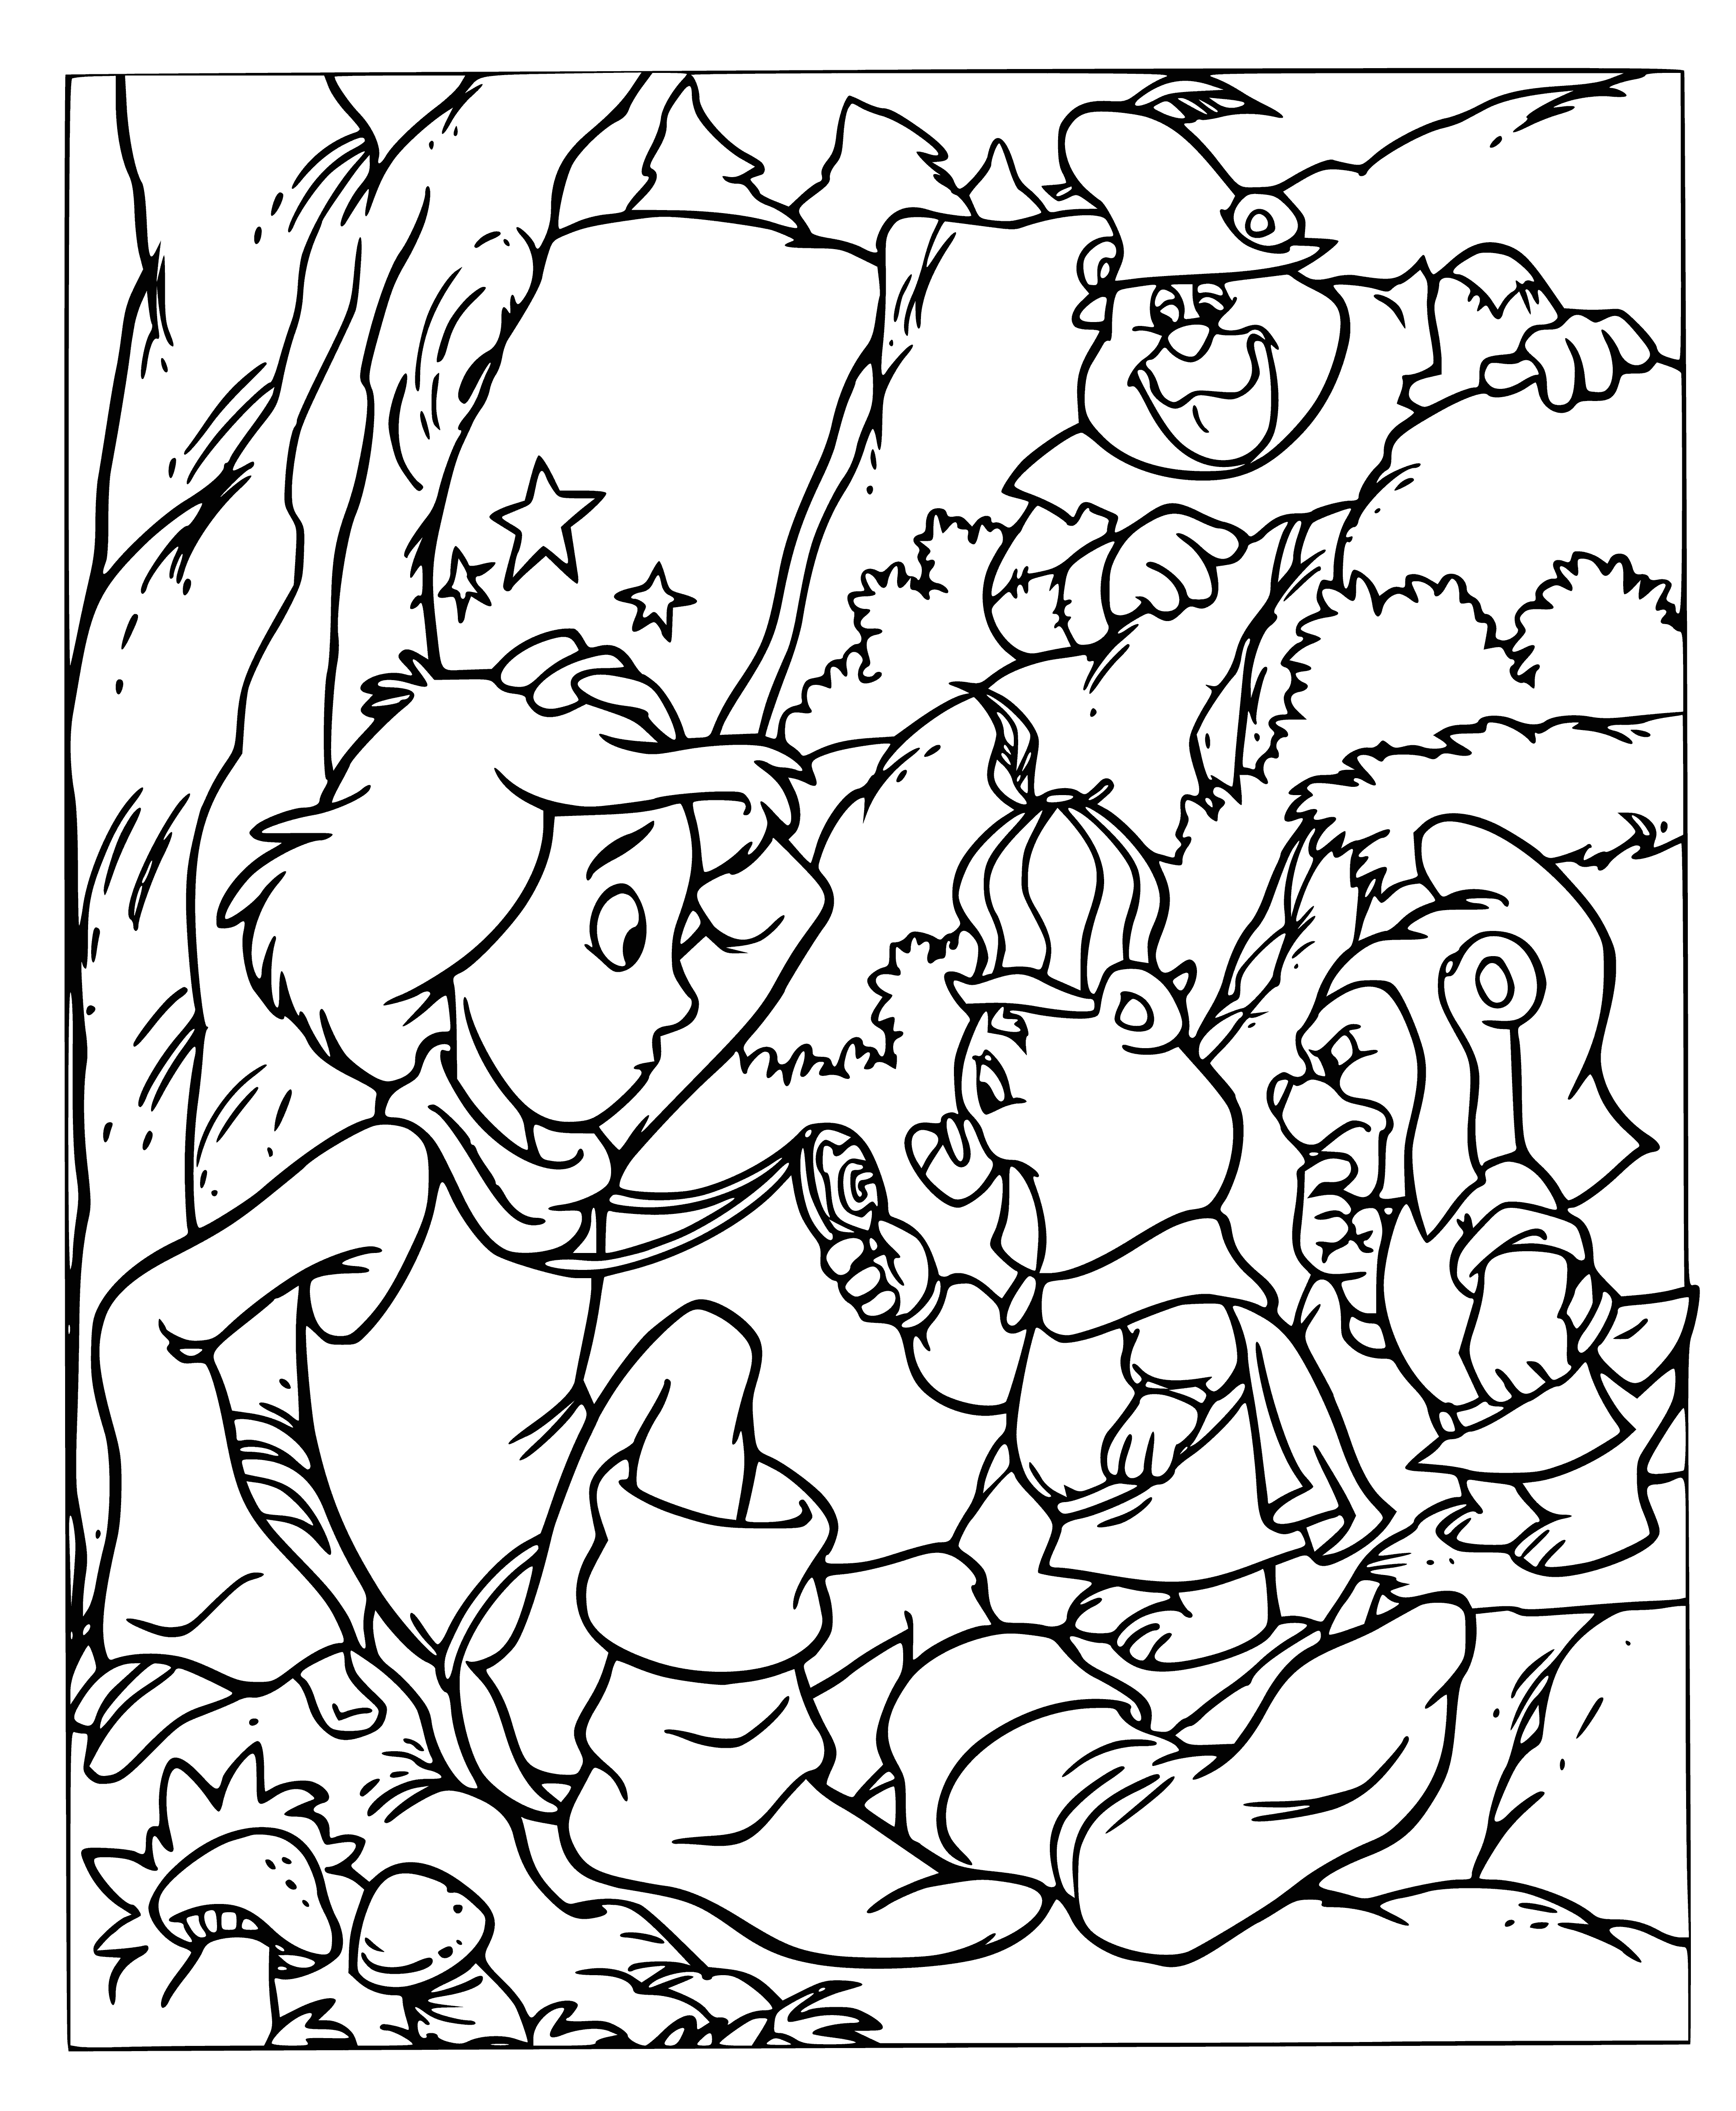 coloring page: A bag of gummy bears containing various colors and sizes.